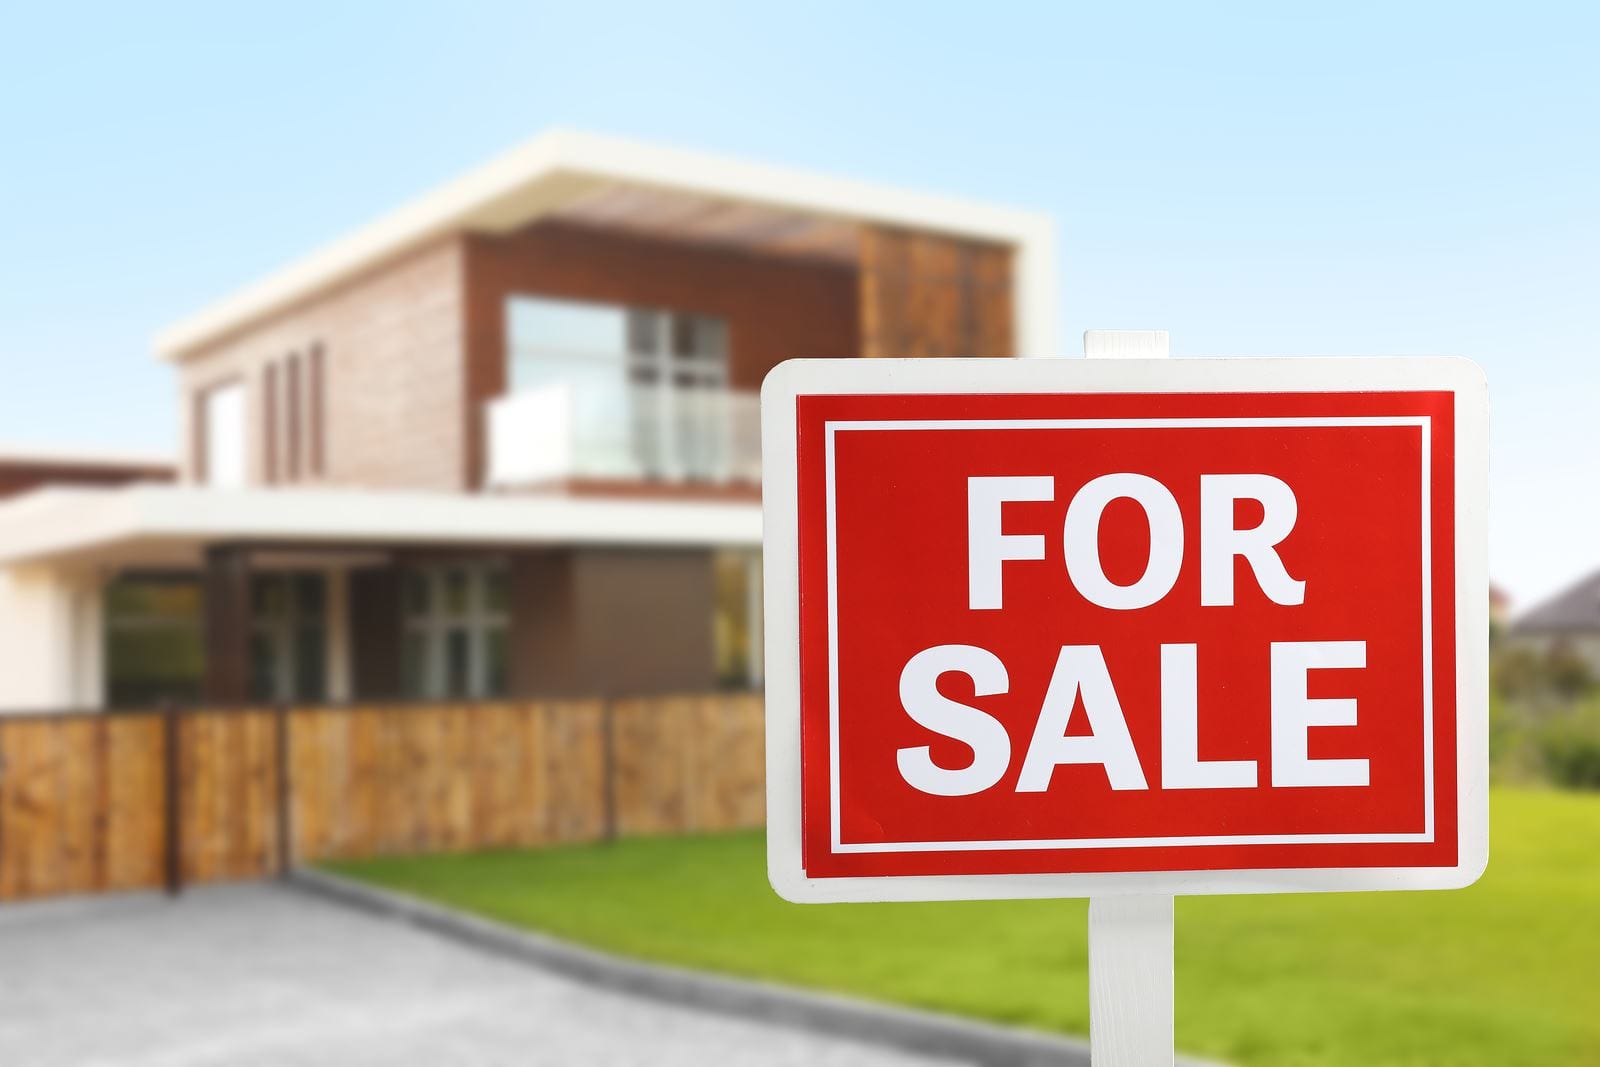 A Complete Guide To Prepare Property For Sale